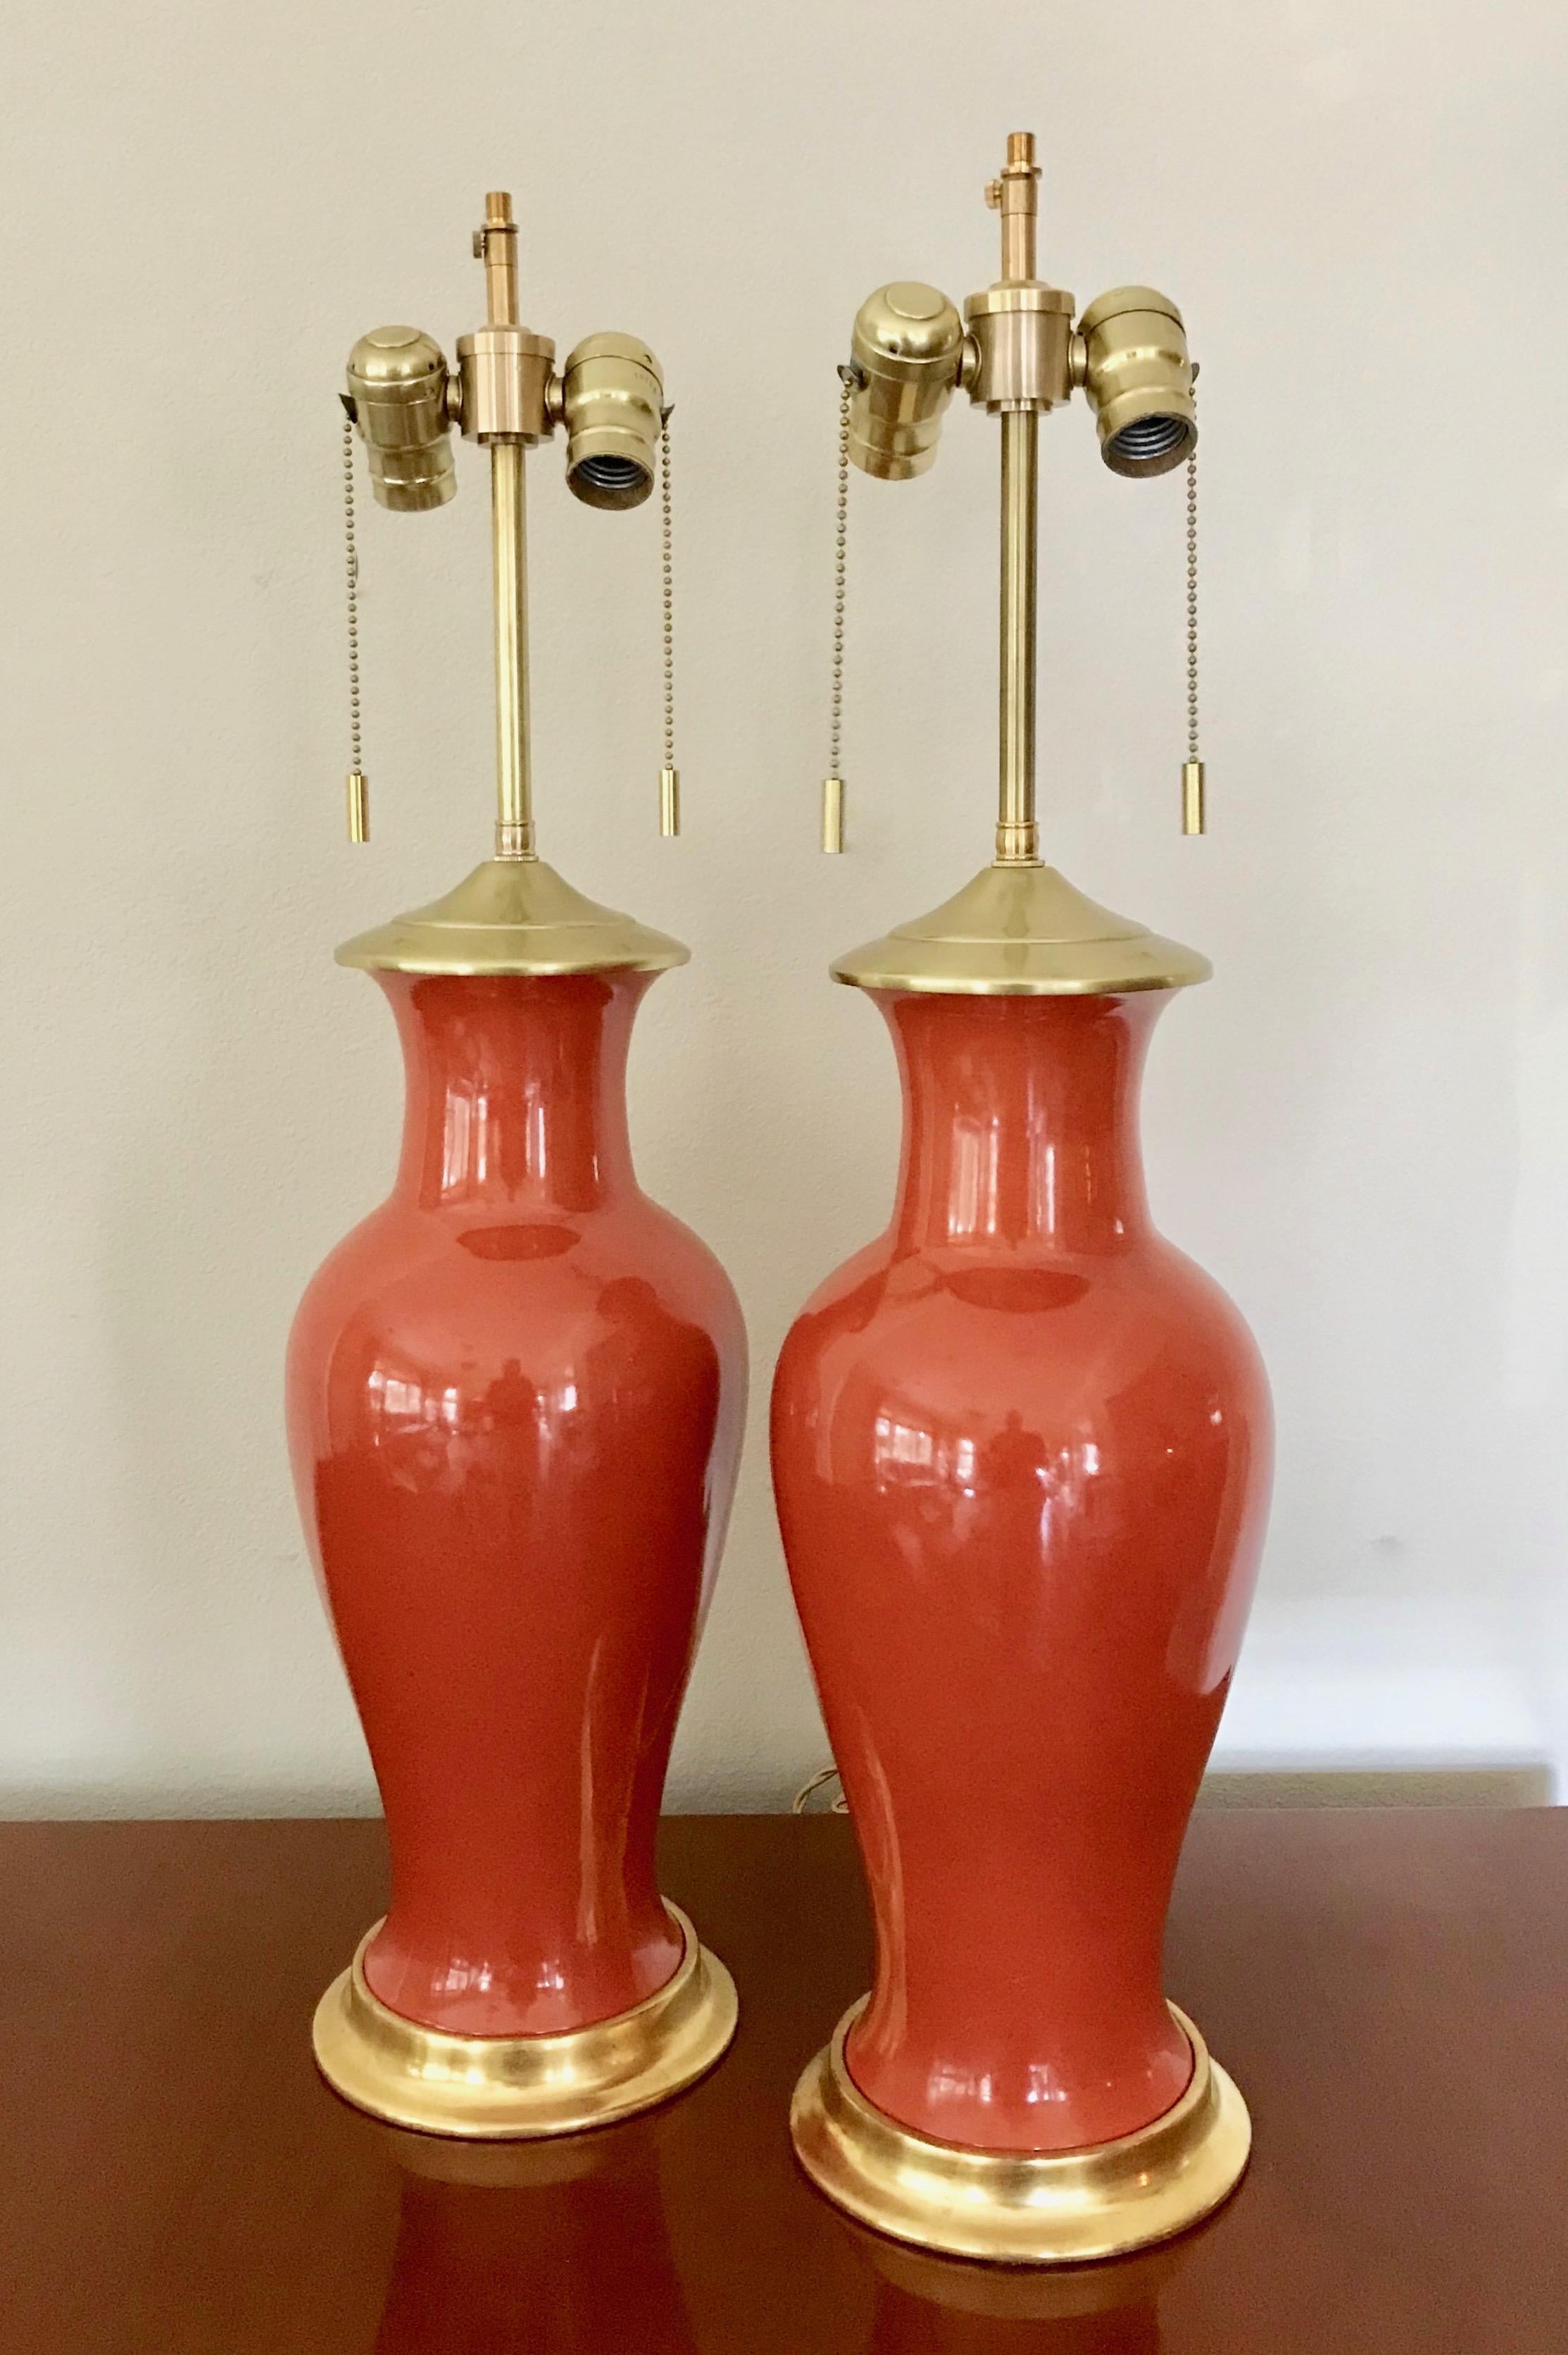 Vintage pair Japanese porcelain vases in striking orange glaze mounted as lamps with custom 23K water gilt turned wood bases with traditional red bole undercoat. Vintage lamps with in the style later made iconic by Christopher Spitzmiller. Lamp